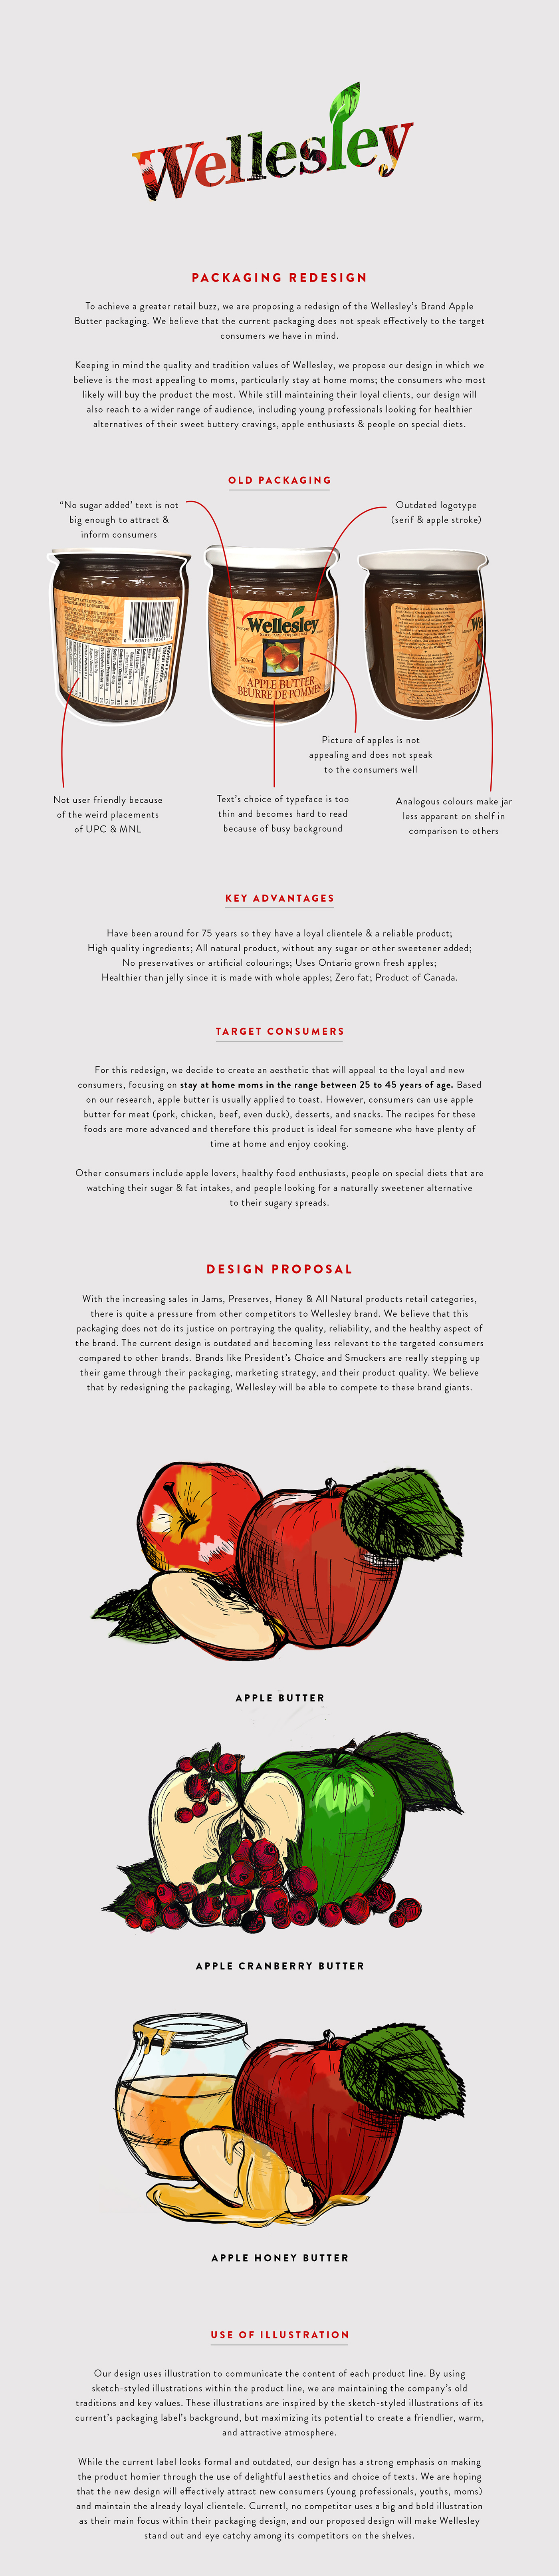 apple package redesign product spread jam butter brandblock Canada sketch